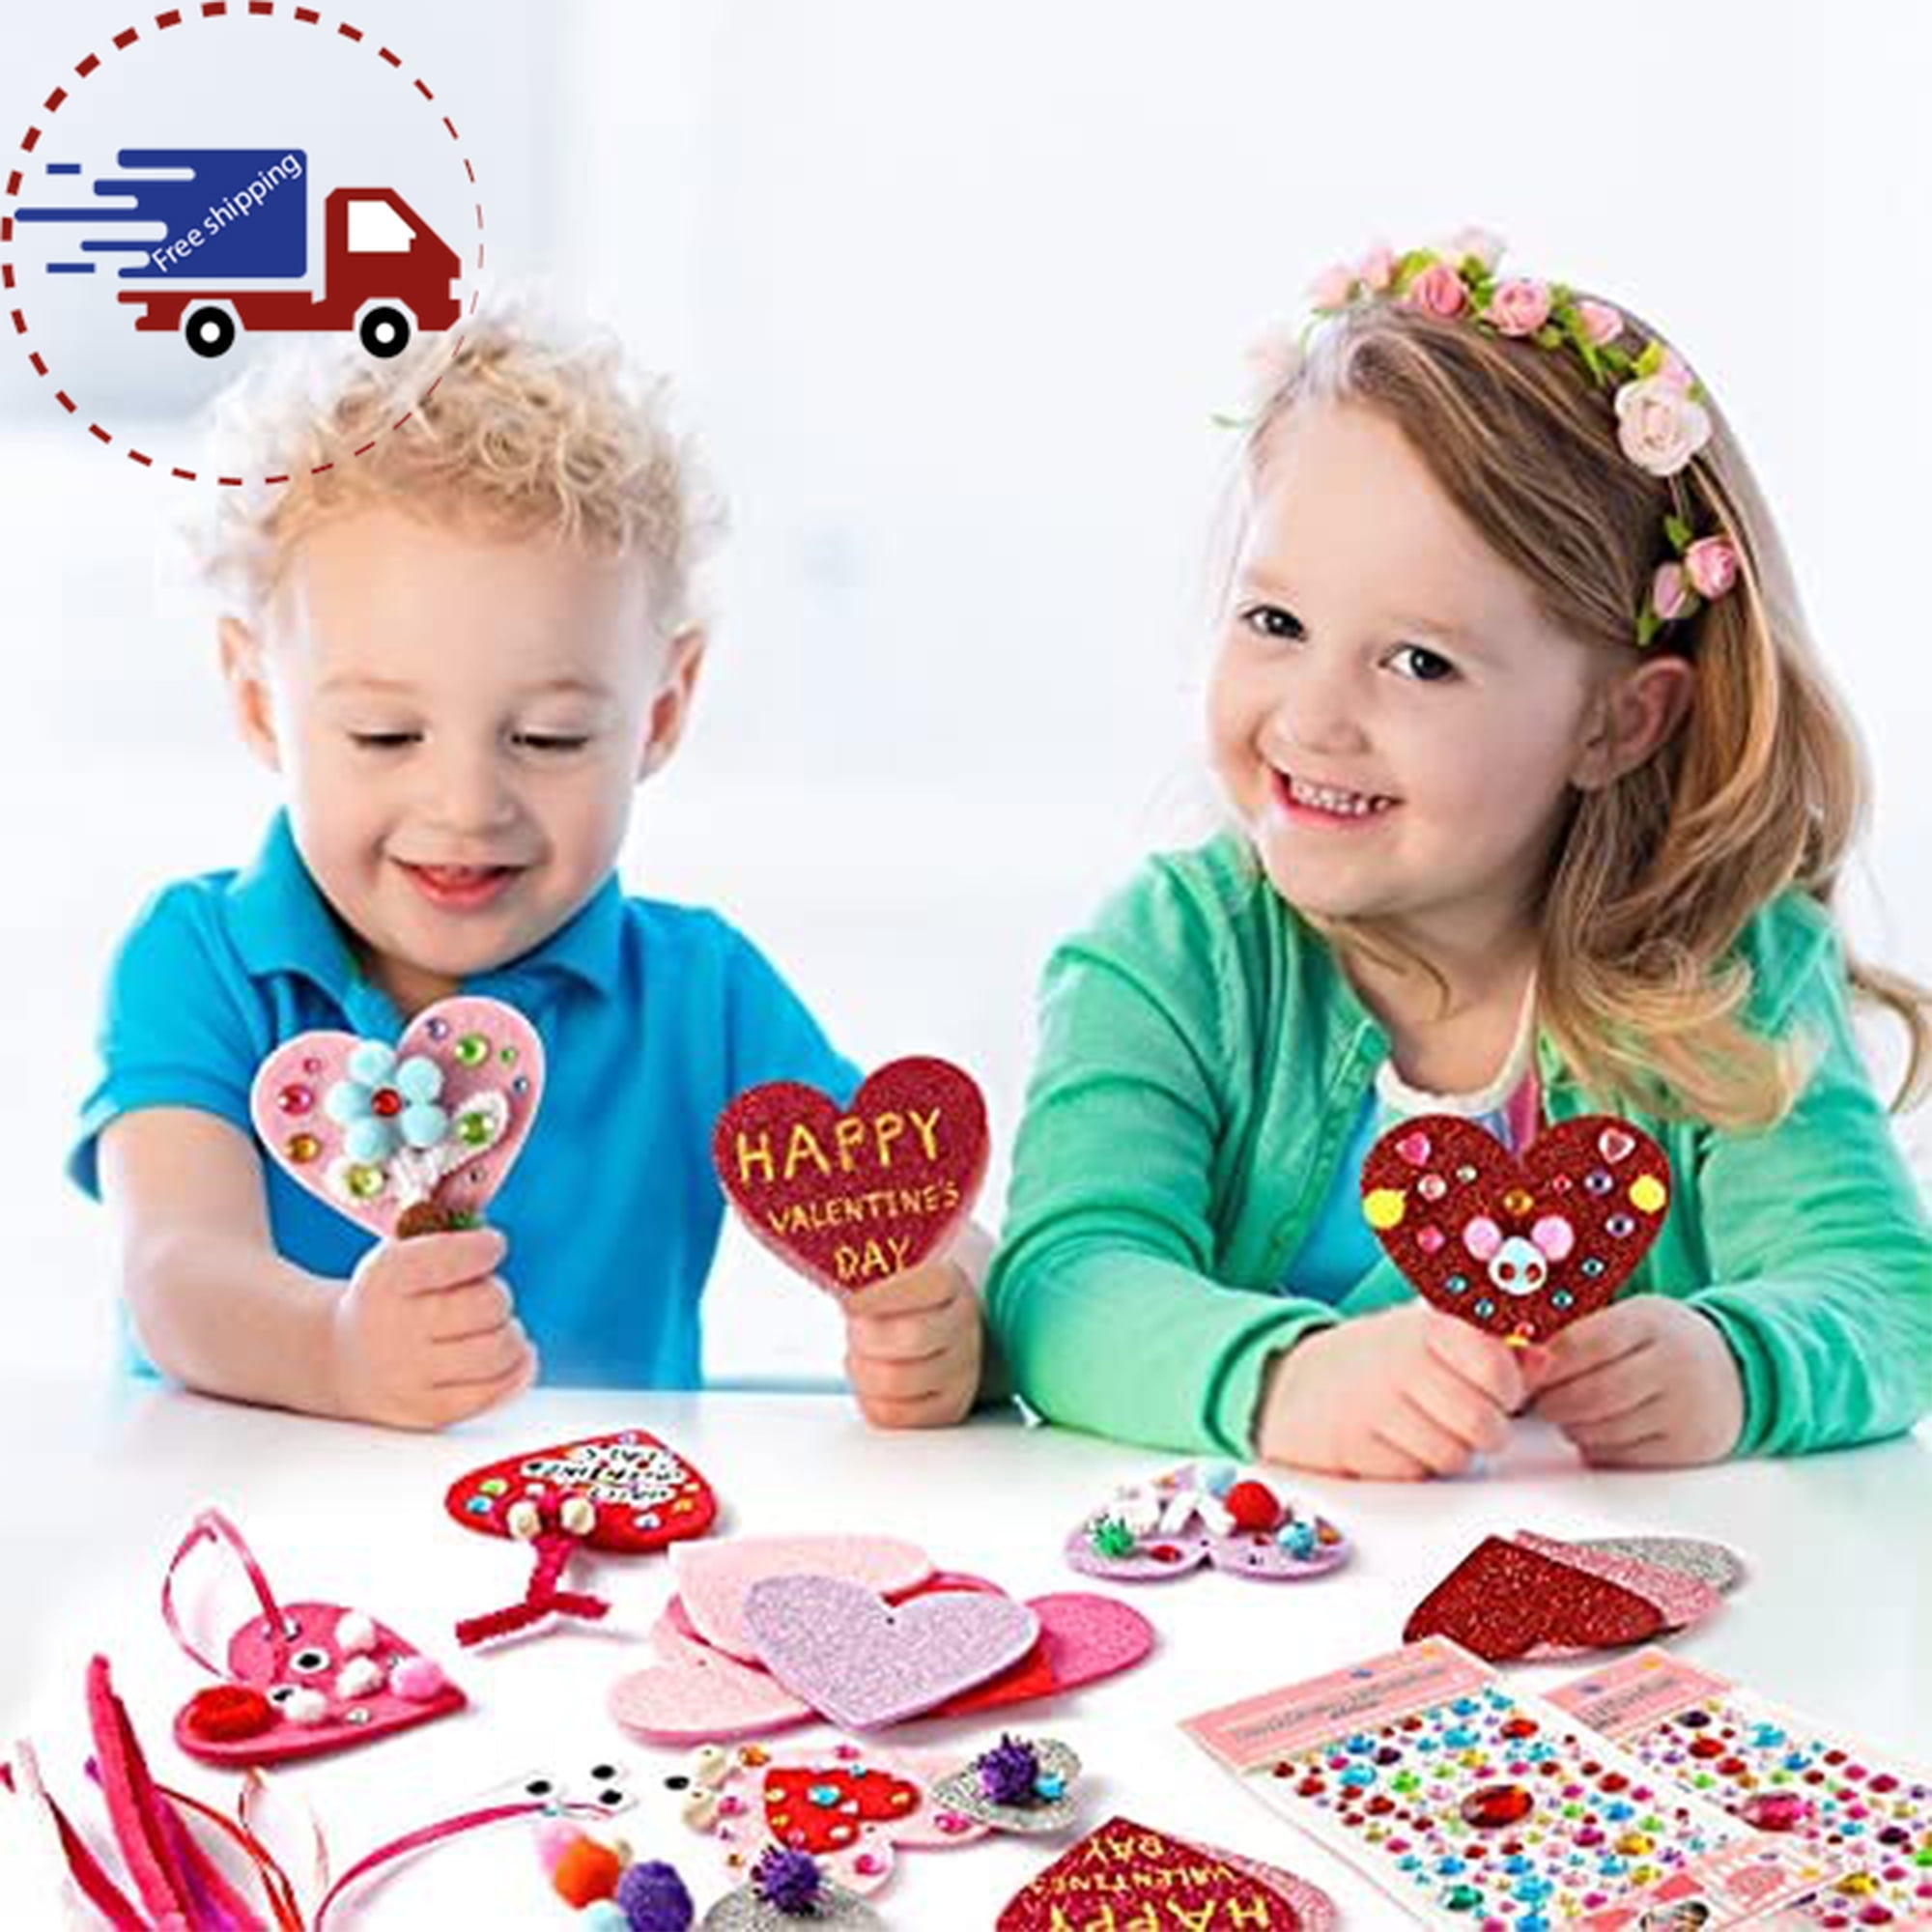  HOWAF 36 Sheets Valentine Heart Stickers for Kids, 400+ Happy  Valentines Day Stickers Love Decorative Sticker for Envelopes Cards Craft  Scrapbooking for Valentines Party Favors Gift Prize : Arts, Crafts & Sewing